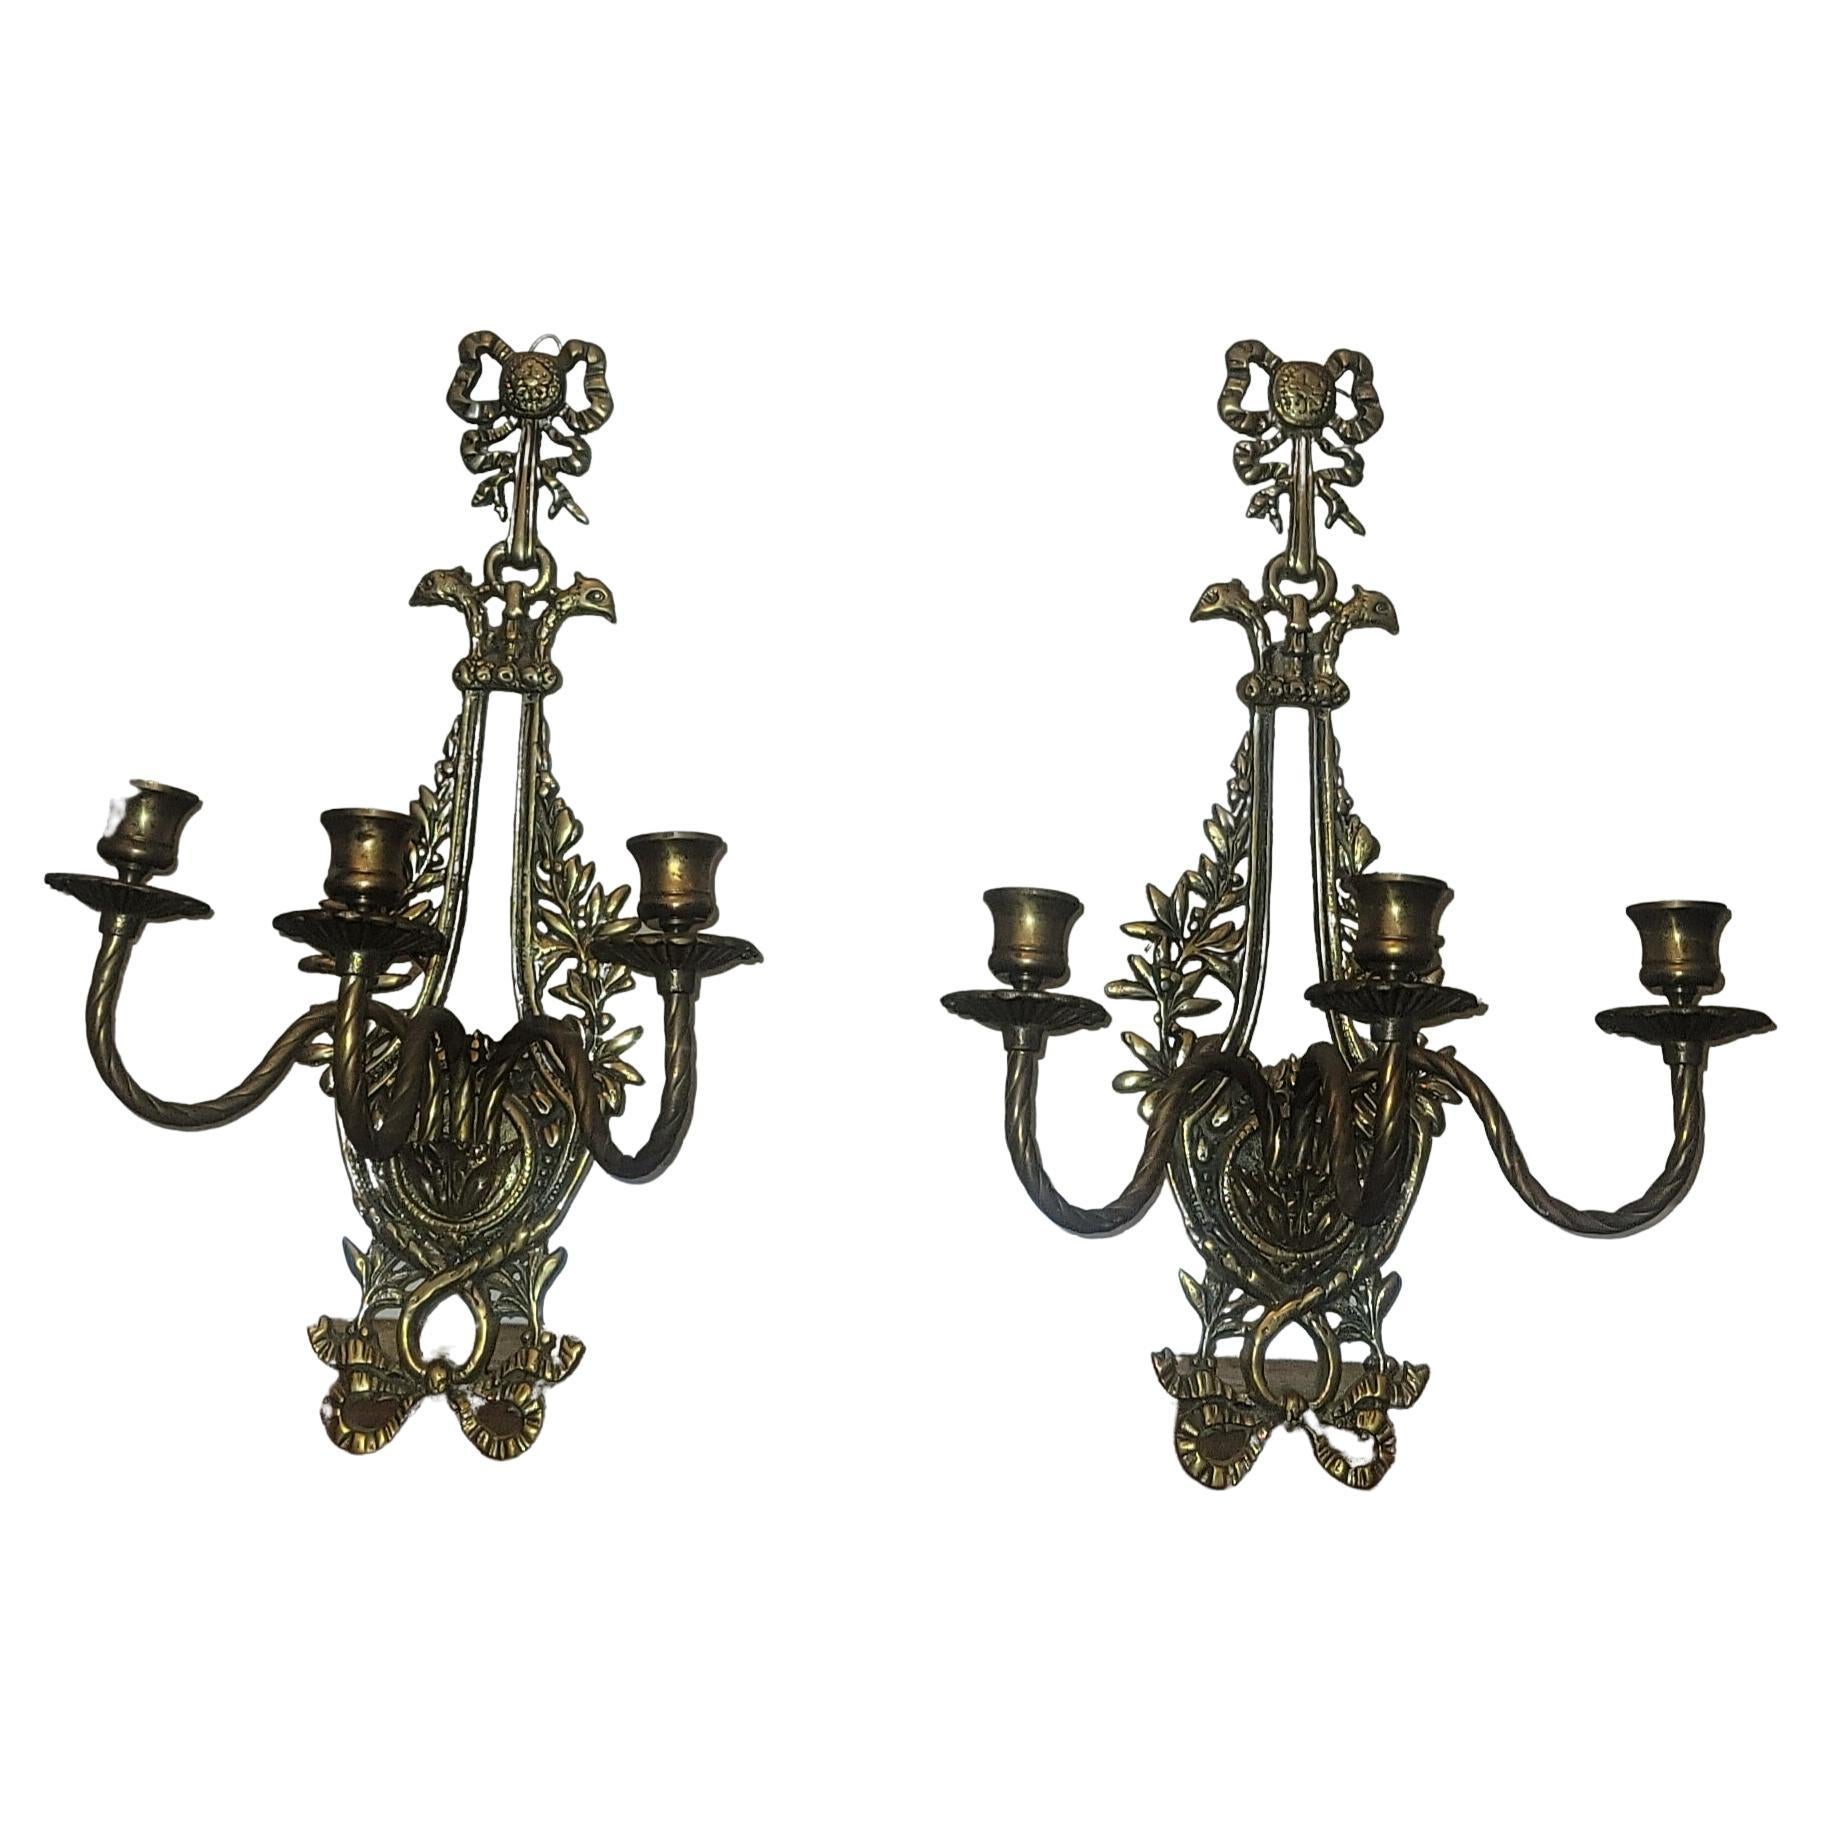 A beautiful pair of Louis XVI style 3 arms wall candle sconces measuring 17.75